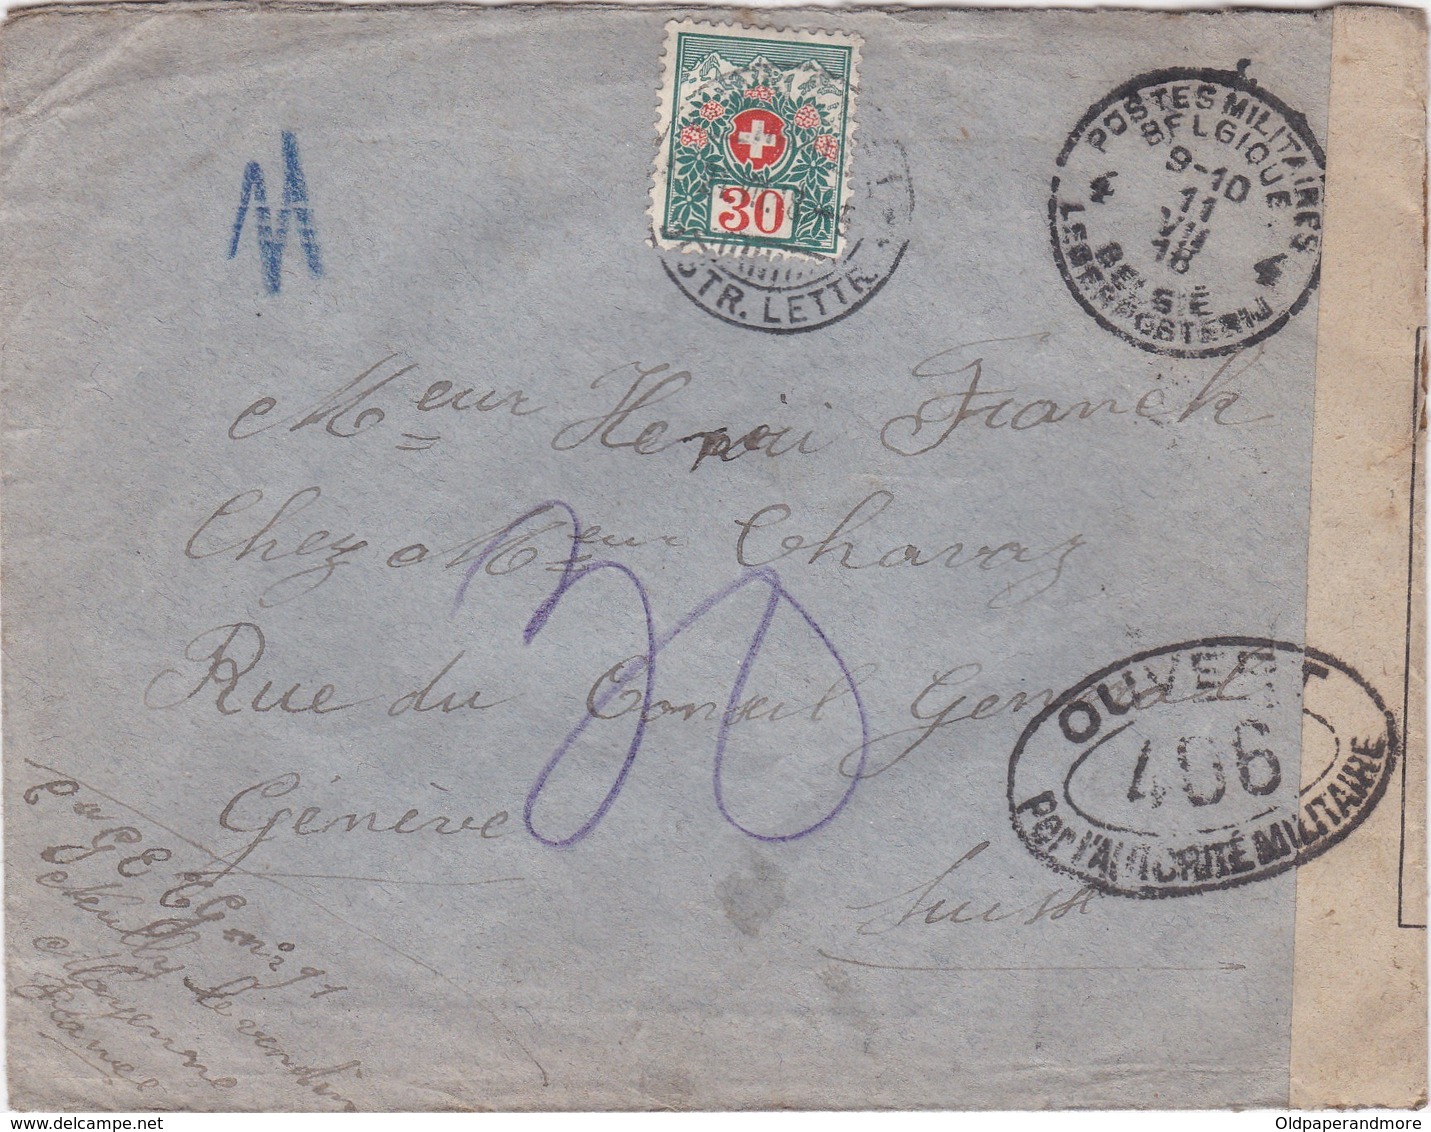 BELGIQUE - CIRCULATED  AND CENSURED COVER - RED CROSS REVENUE - MILITARY CANCEL TO GENEVE SUISSE - SWITZERLAND - Marques D'armées